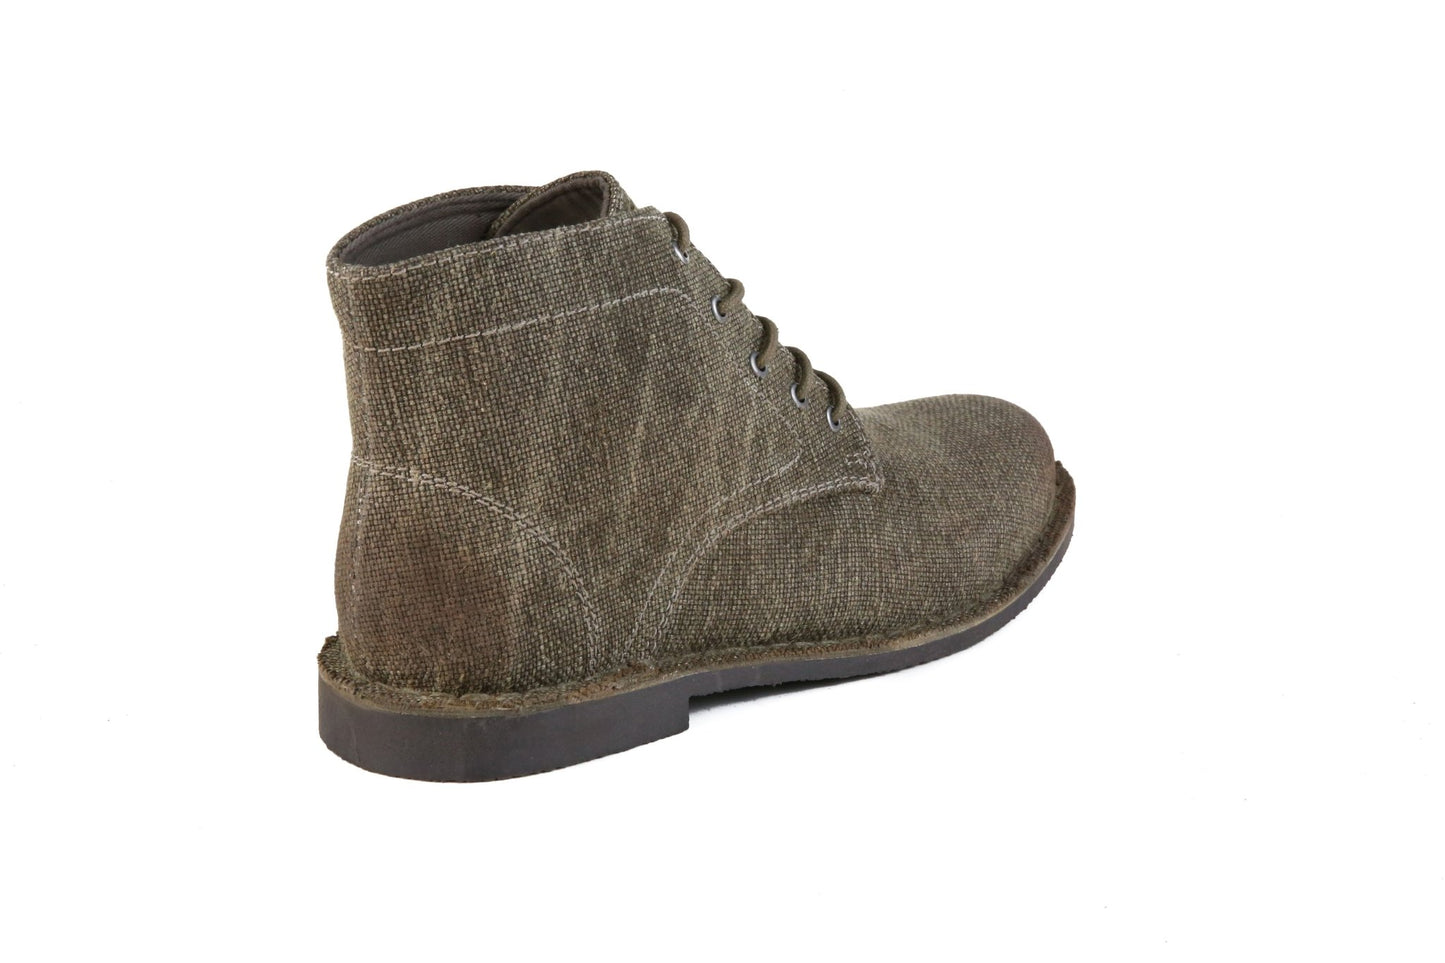 Hound & Hammer The Grover-Vegan | Men's Sage Brown Ankle Boots - Men - Footwear - Boots - Ankle Boots - Benn~Burry